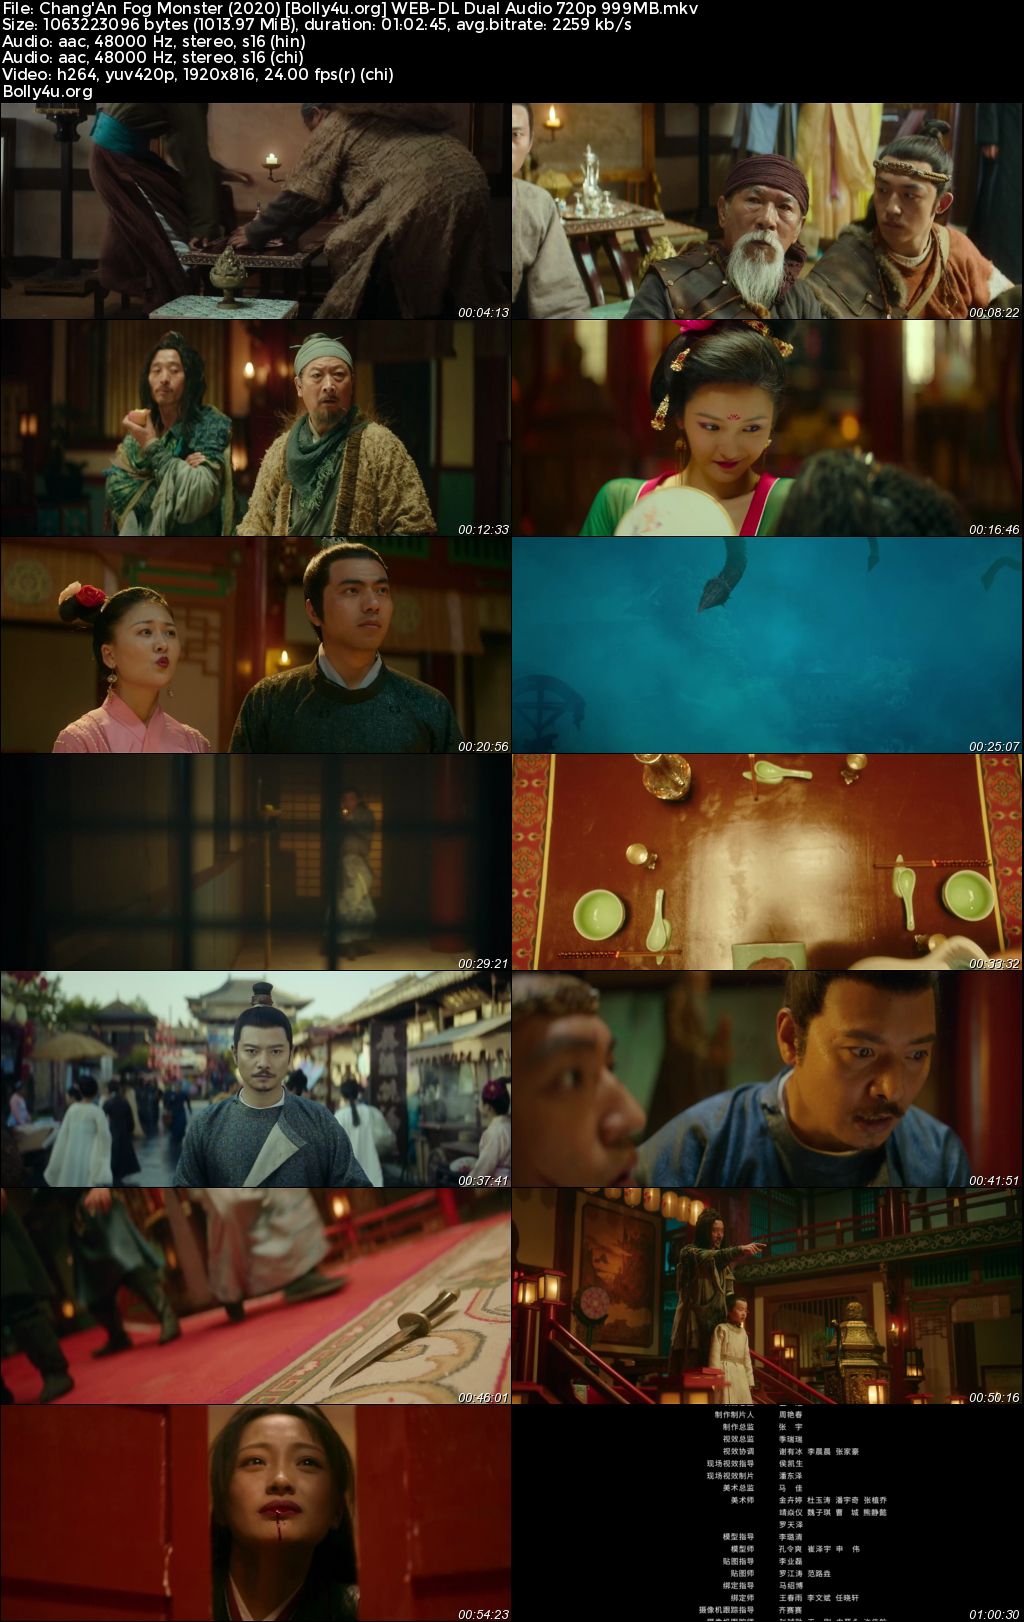 Chang'An Fog Monster 2020 WEB-DL Hindi Dual Audio Full Movie Download 720p 480p